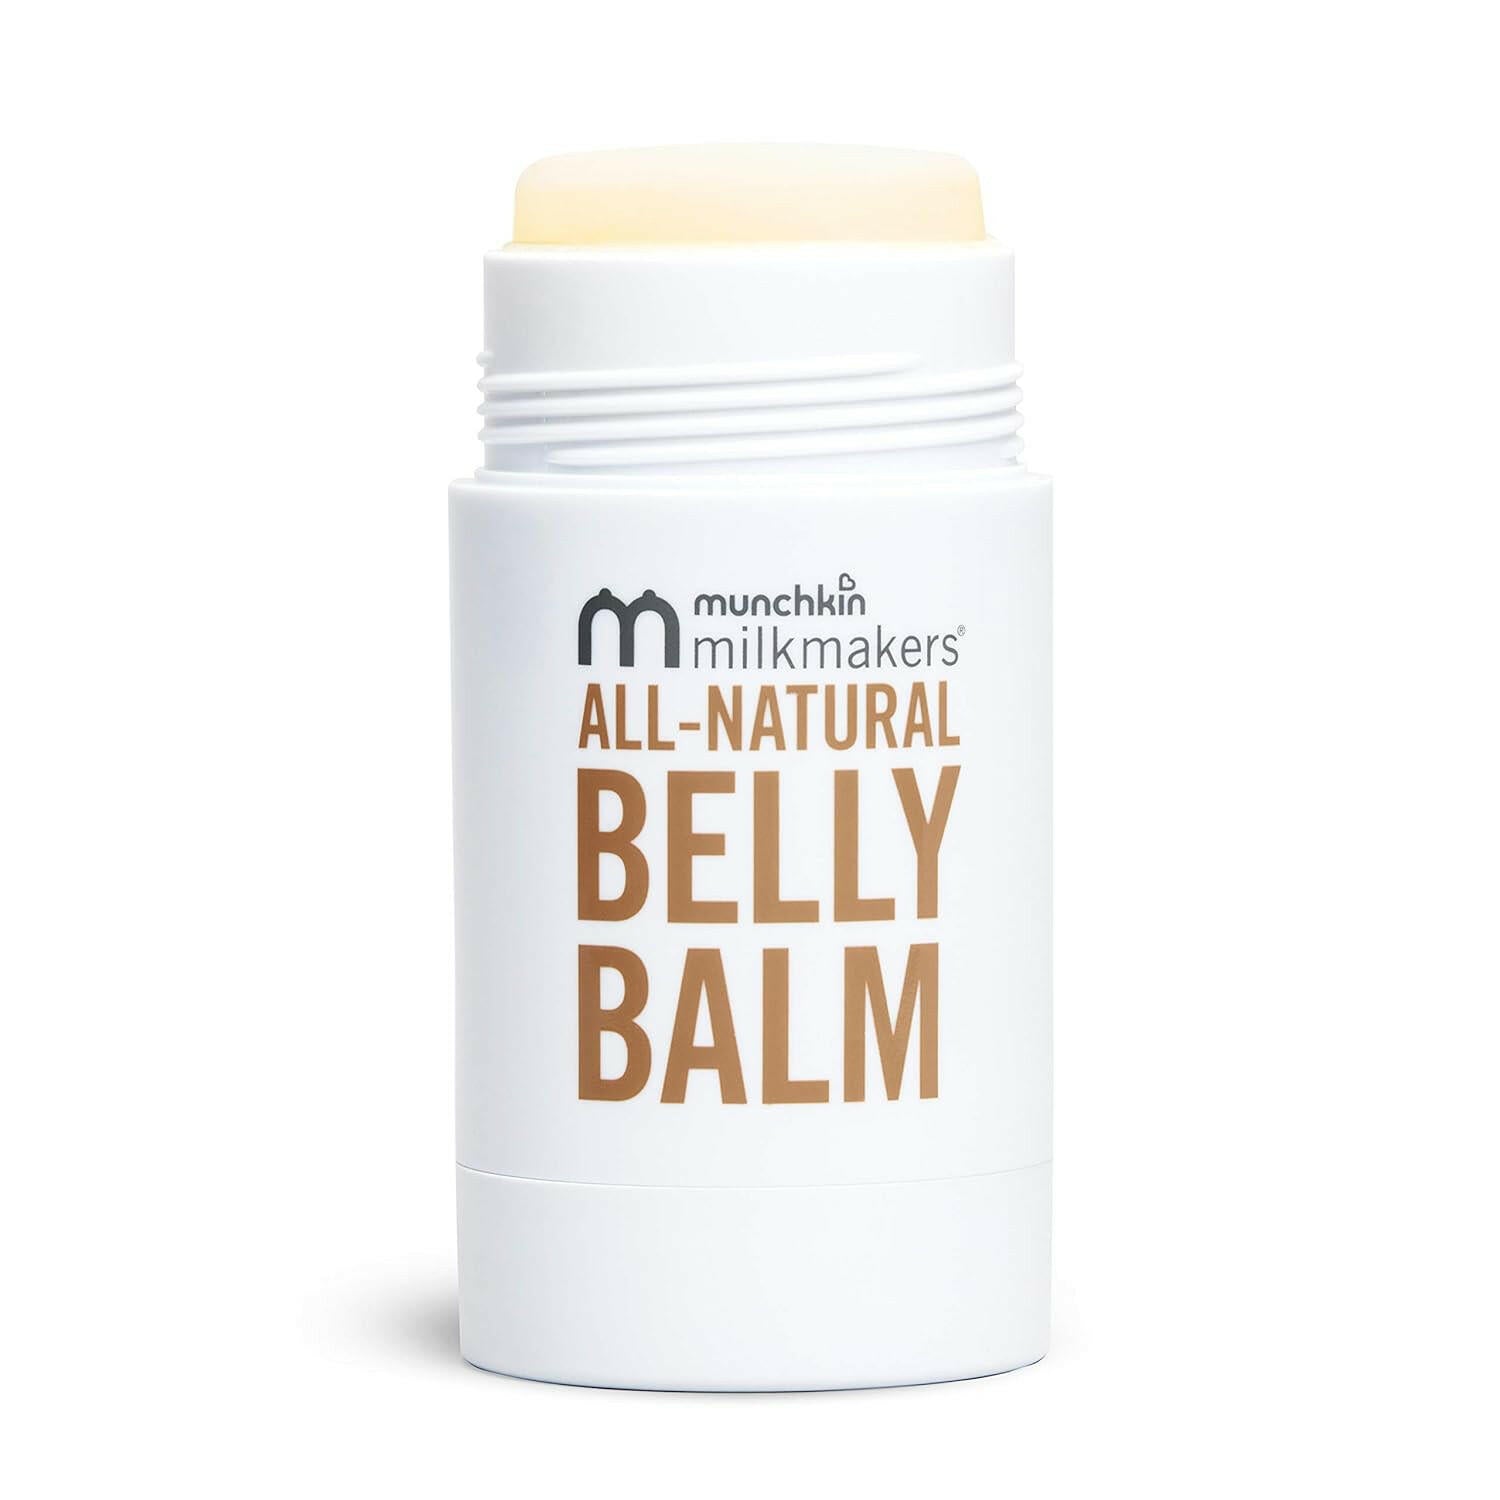 Munchkin Milkmakers Twist-Stick Belly Balm All Natural and Moisturizing for Pregnancy Skincare